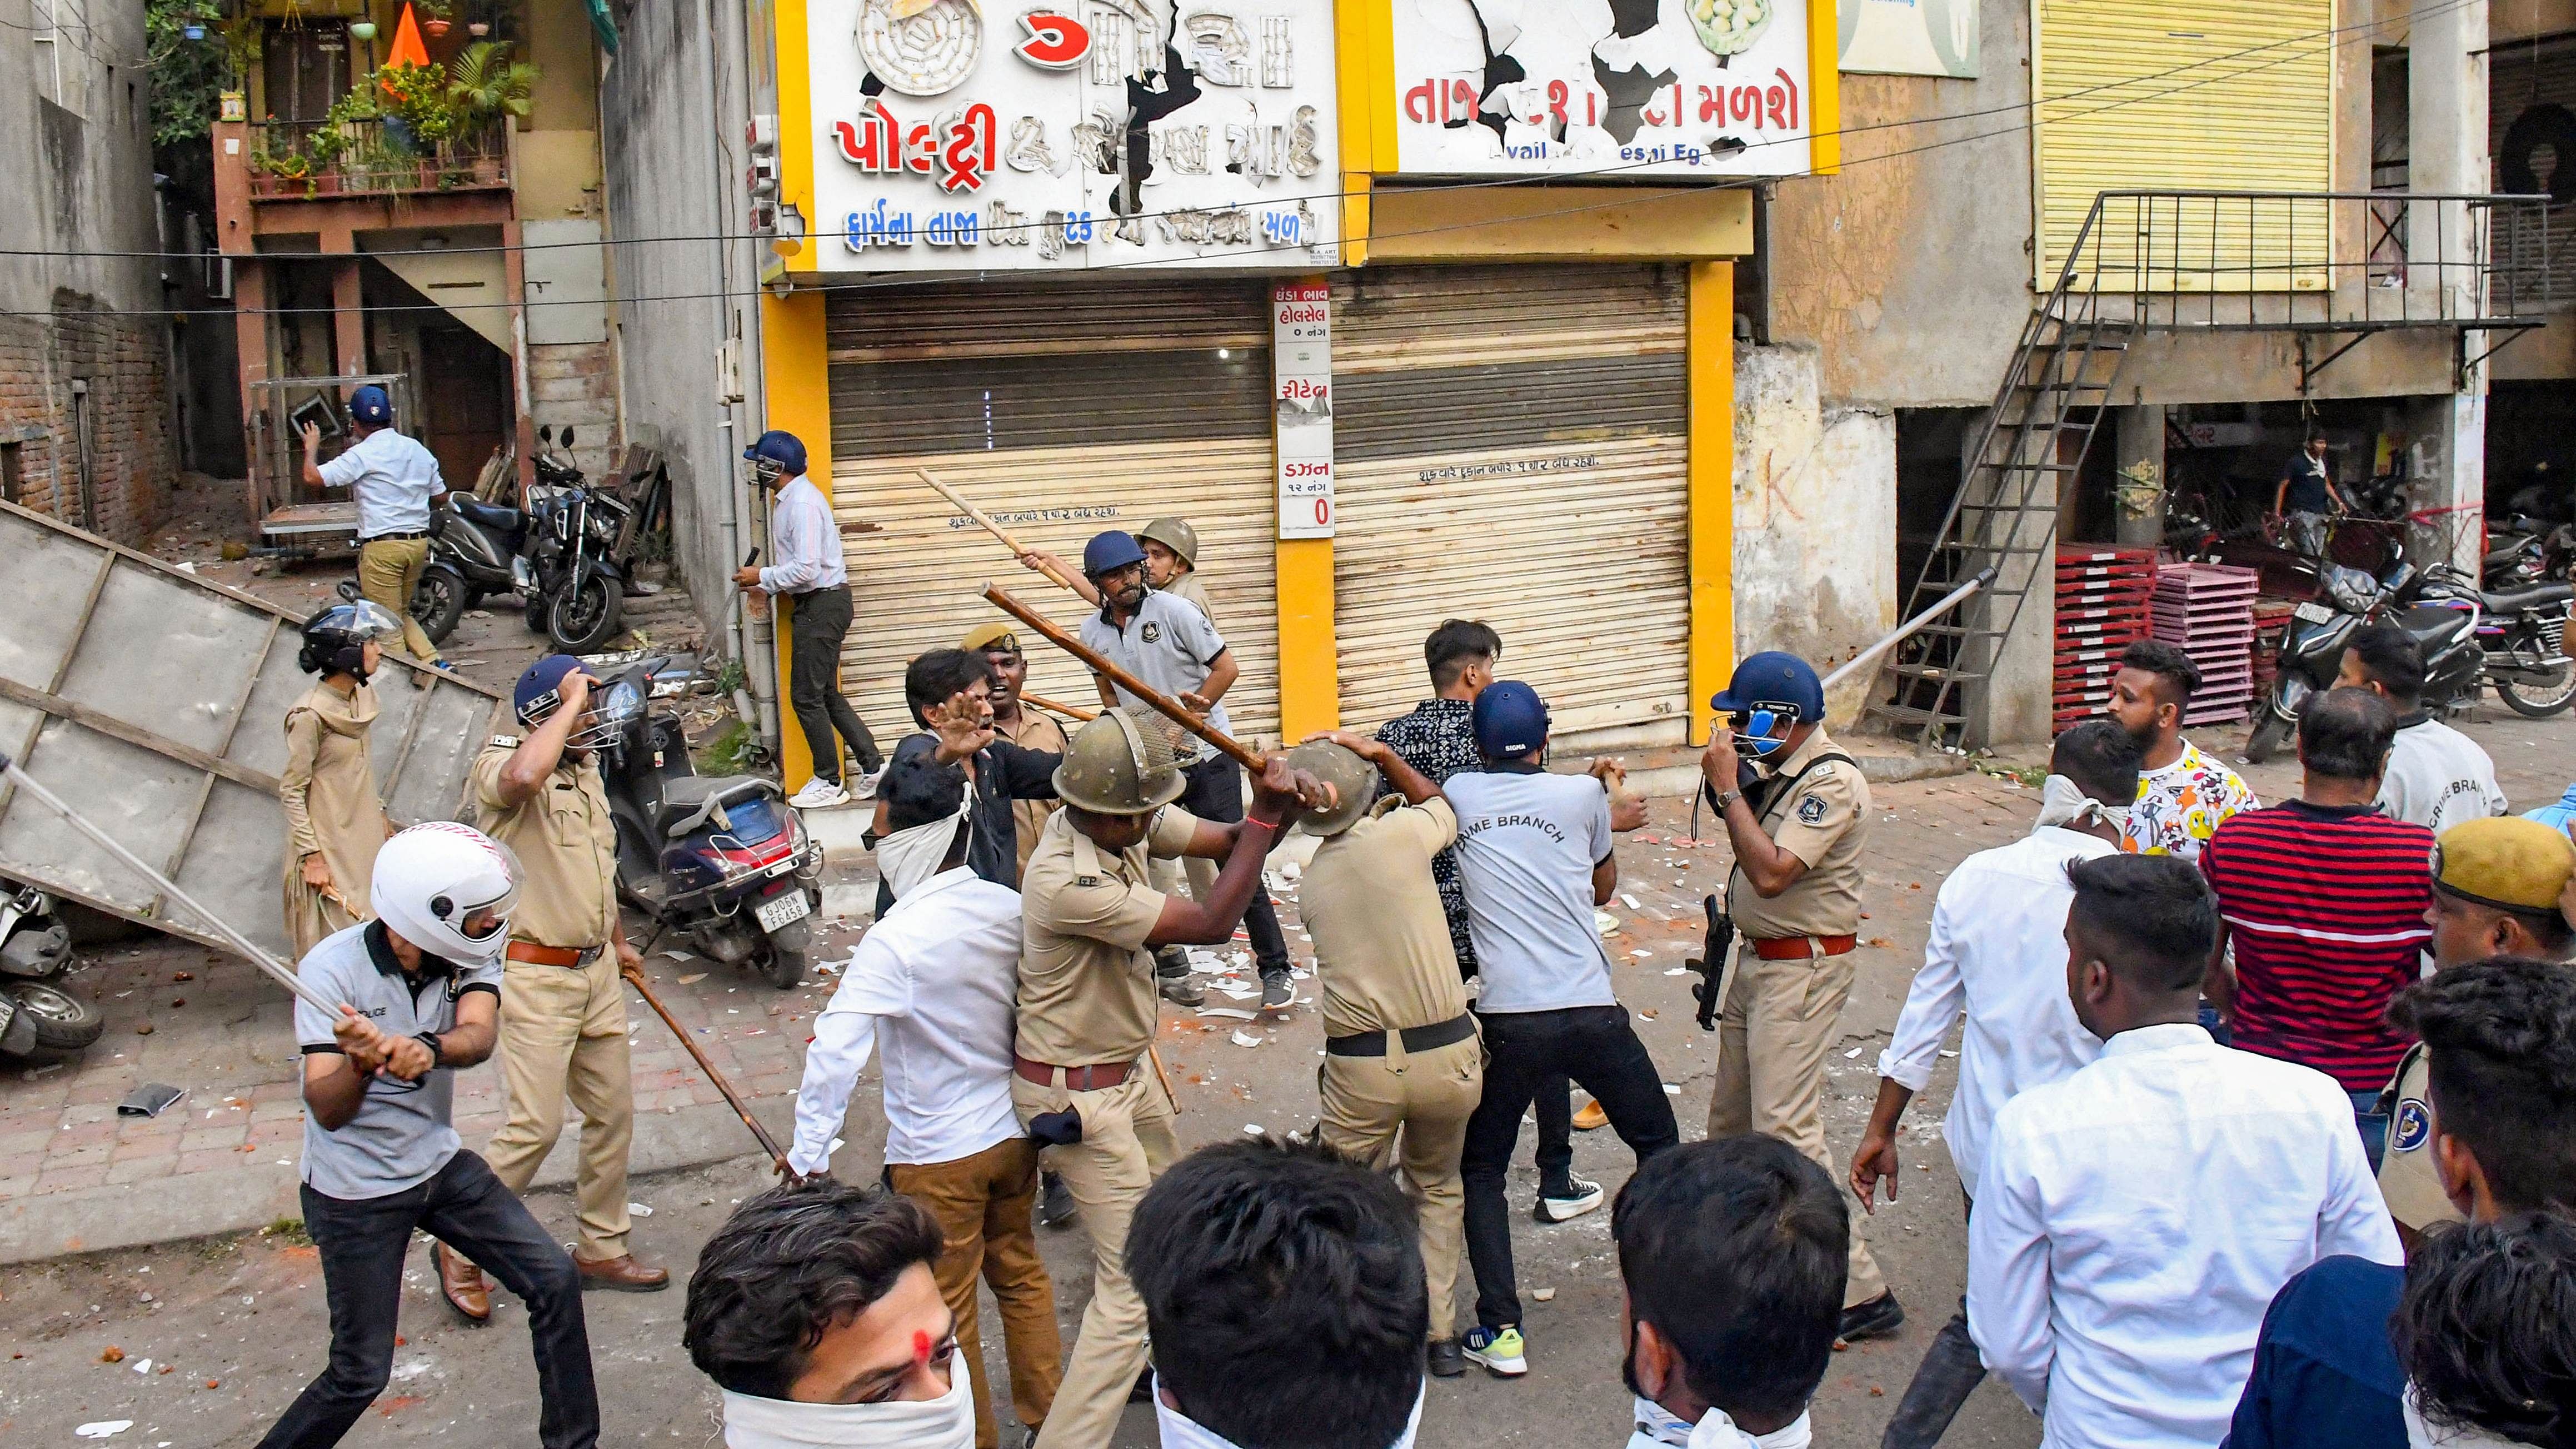 Police personnel deployed after incidents of stone pelting on a ‘Ram Navmi’ procession, in Vadodara. Credit: PTI Photo